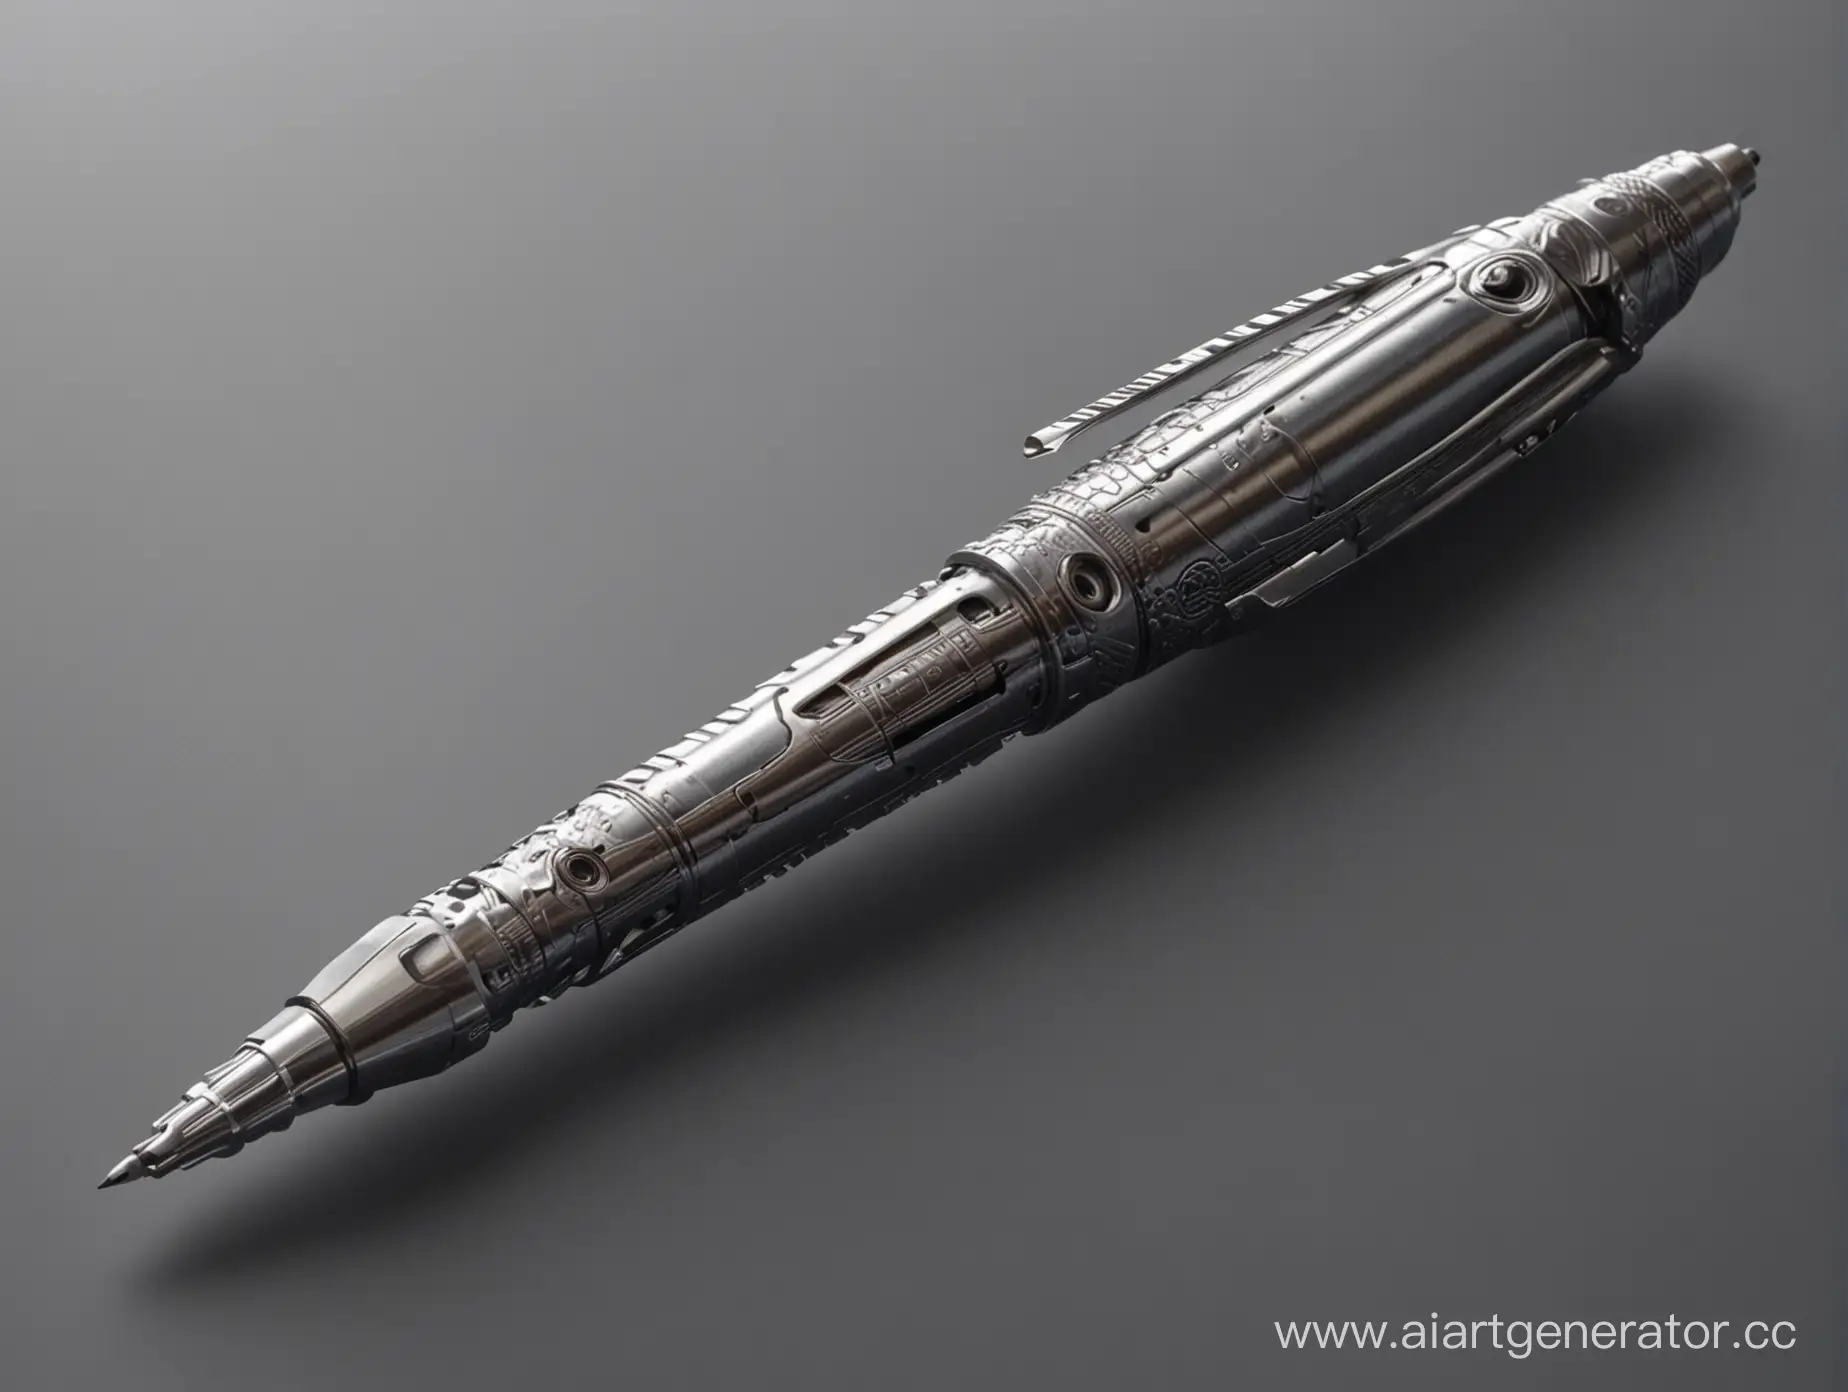 Realistic-Metal-Ballpoint-Pen-Crafted-from-Engine-Piston-in-4K-Detail